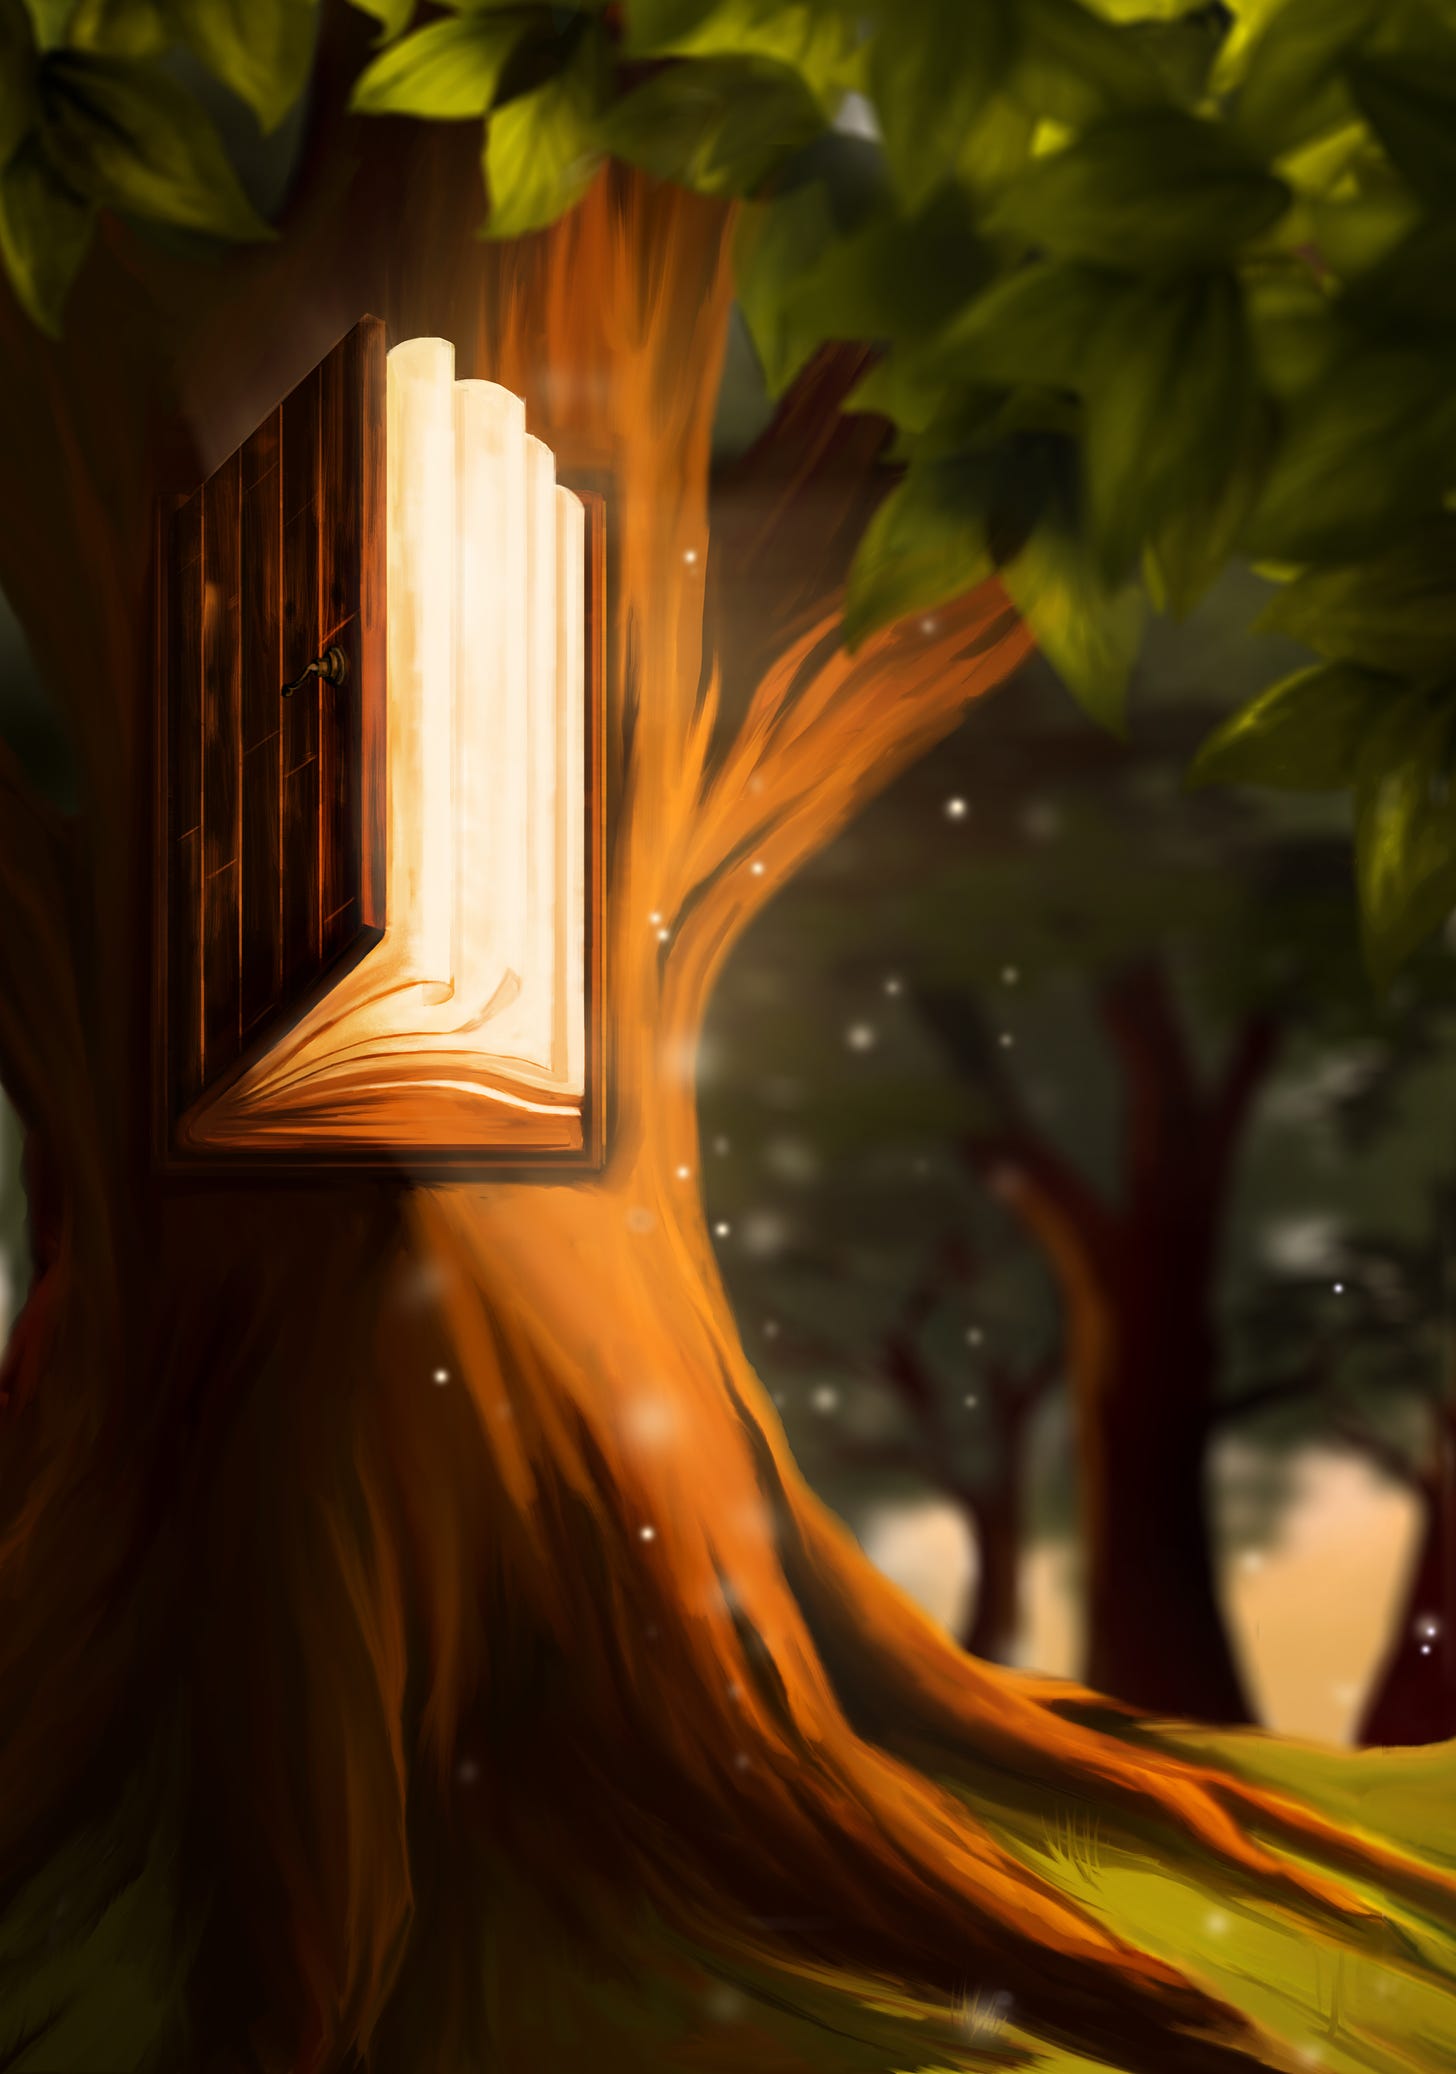 A tree in a forest. On the tree’s trunk, an opening door. Within the door, glowing pages unfurl.